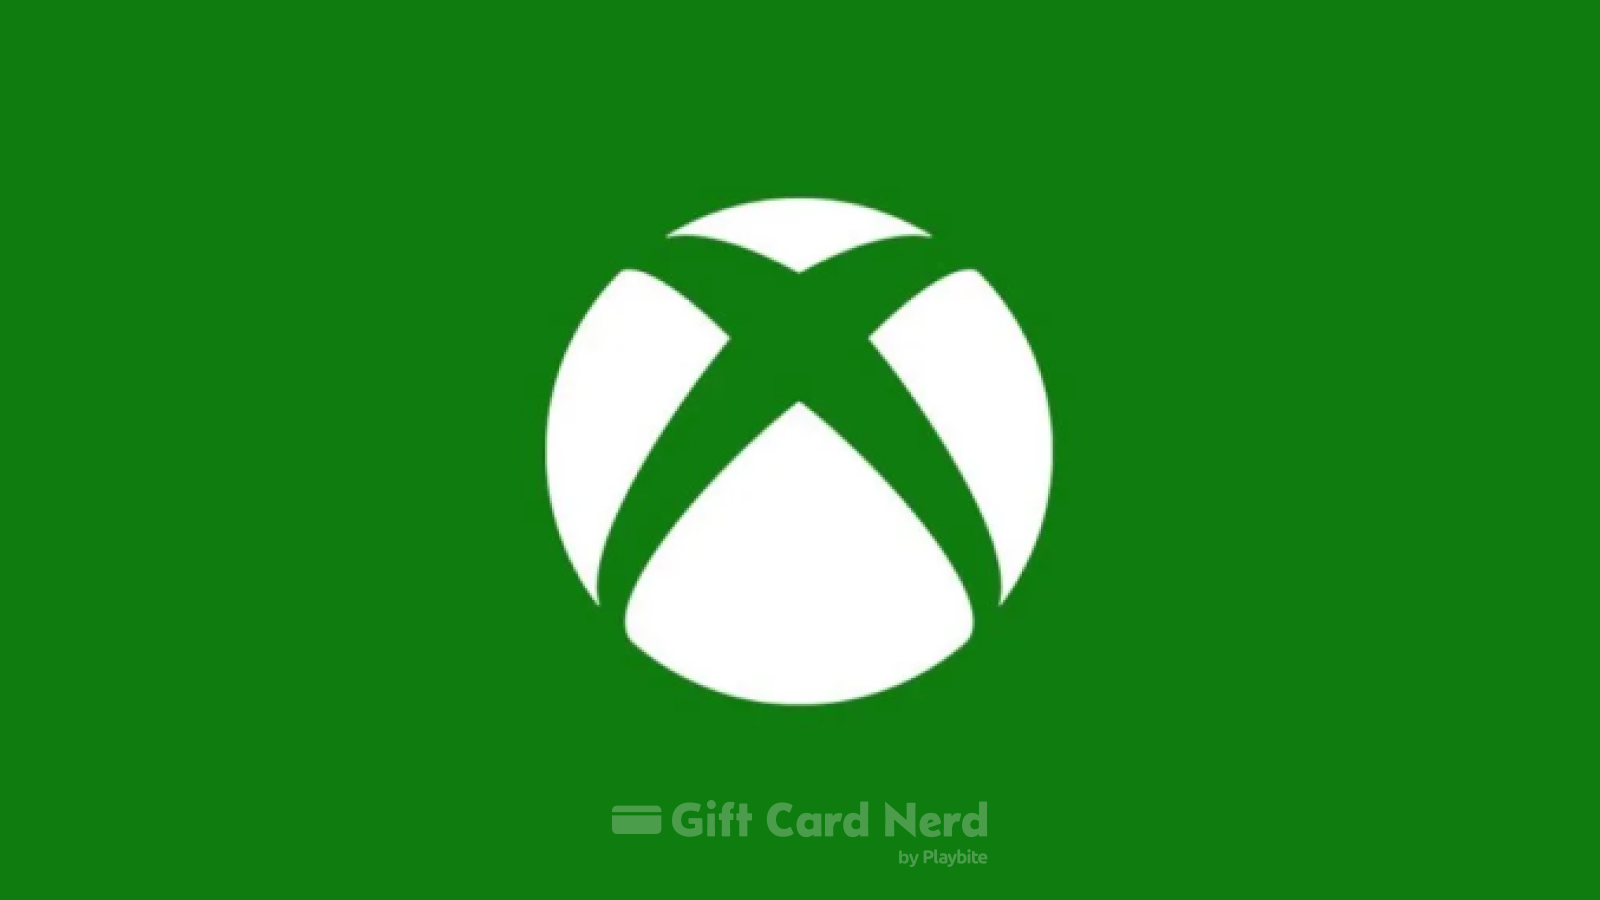 Can I Use an Xbox Gift Card on Google Play Store?